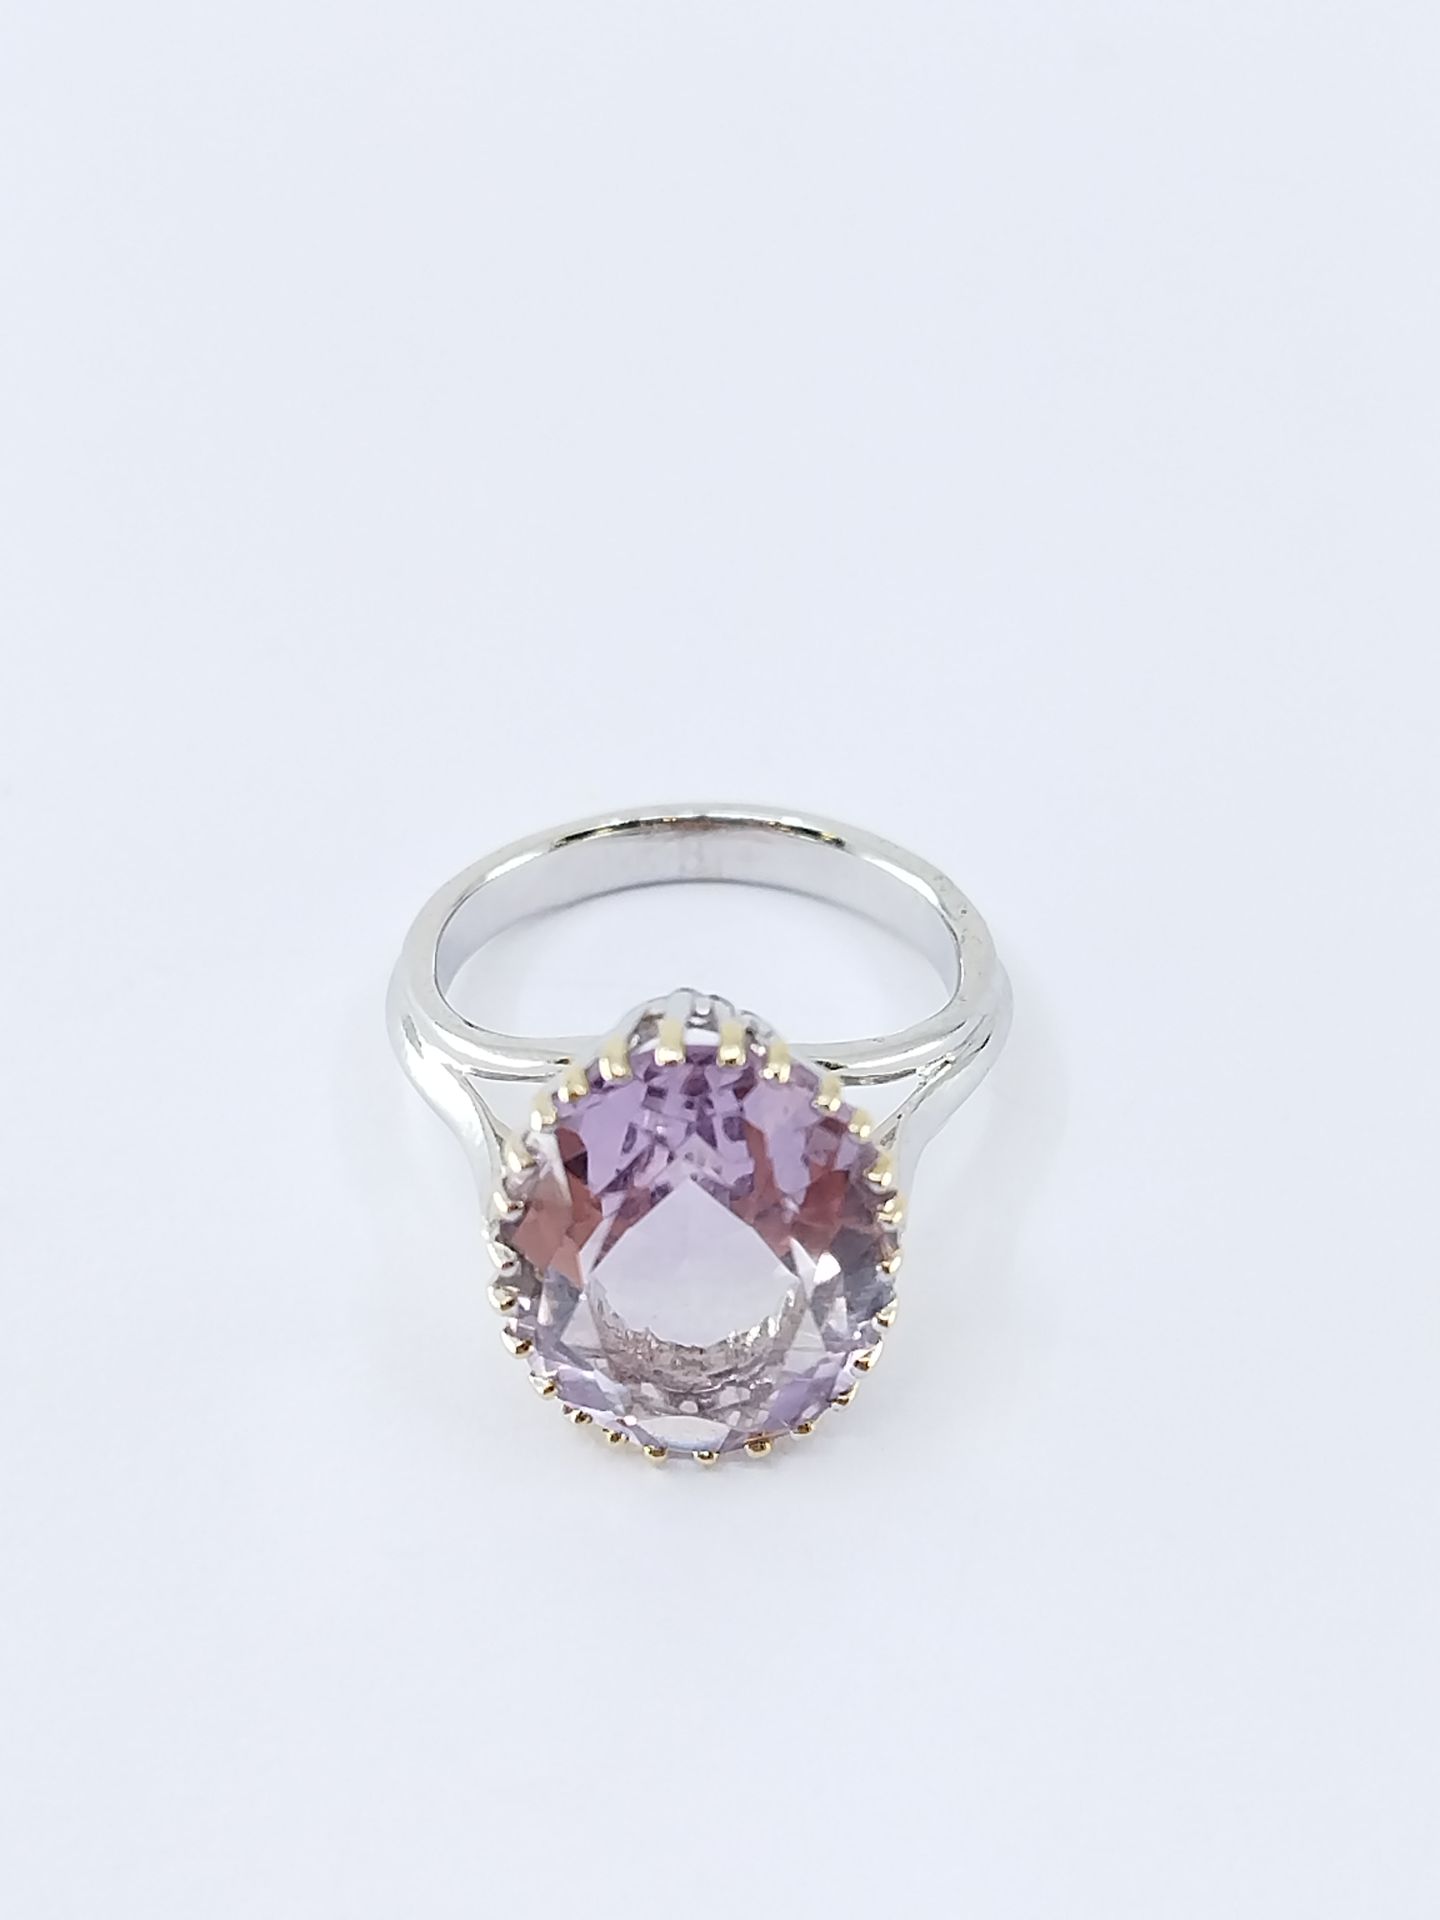 Null RING in white gold 750° decorated with an oval amethyst in claw setting

Gr&hellip;